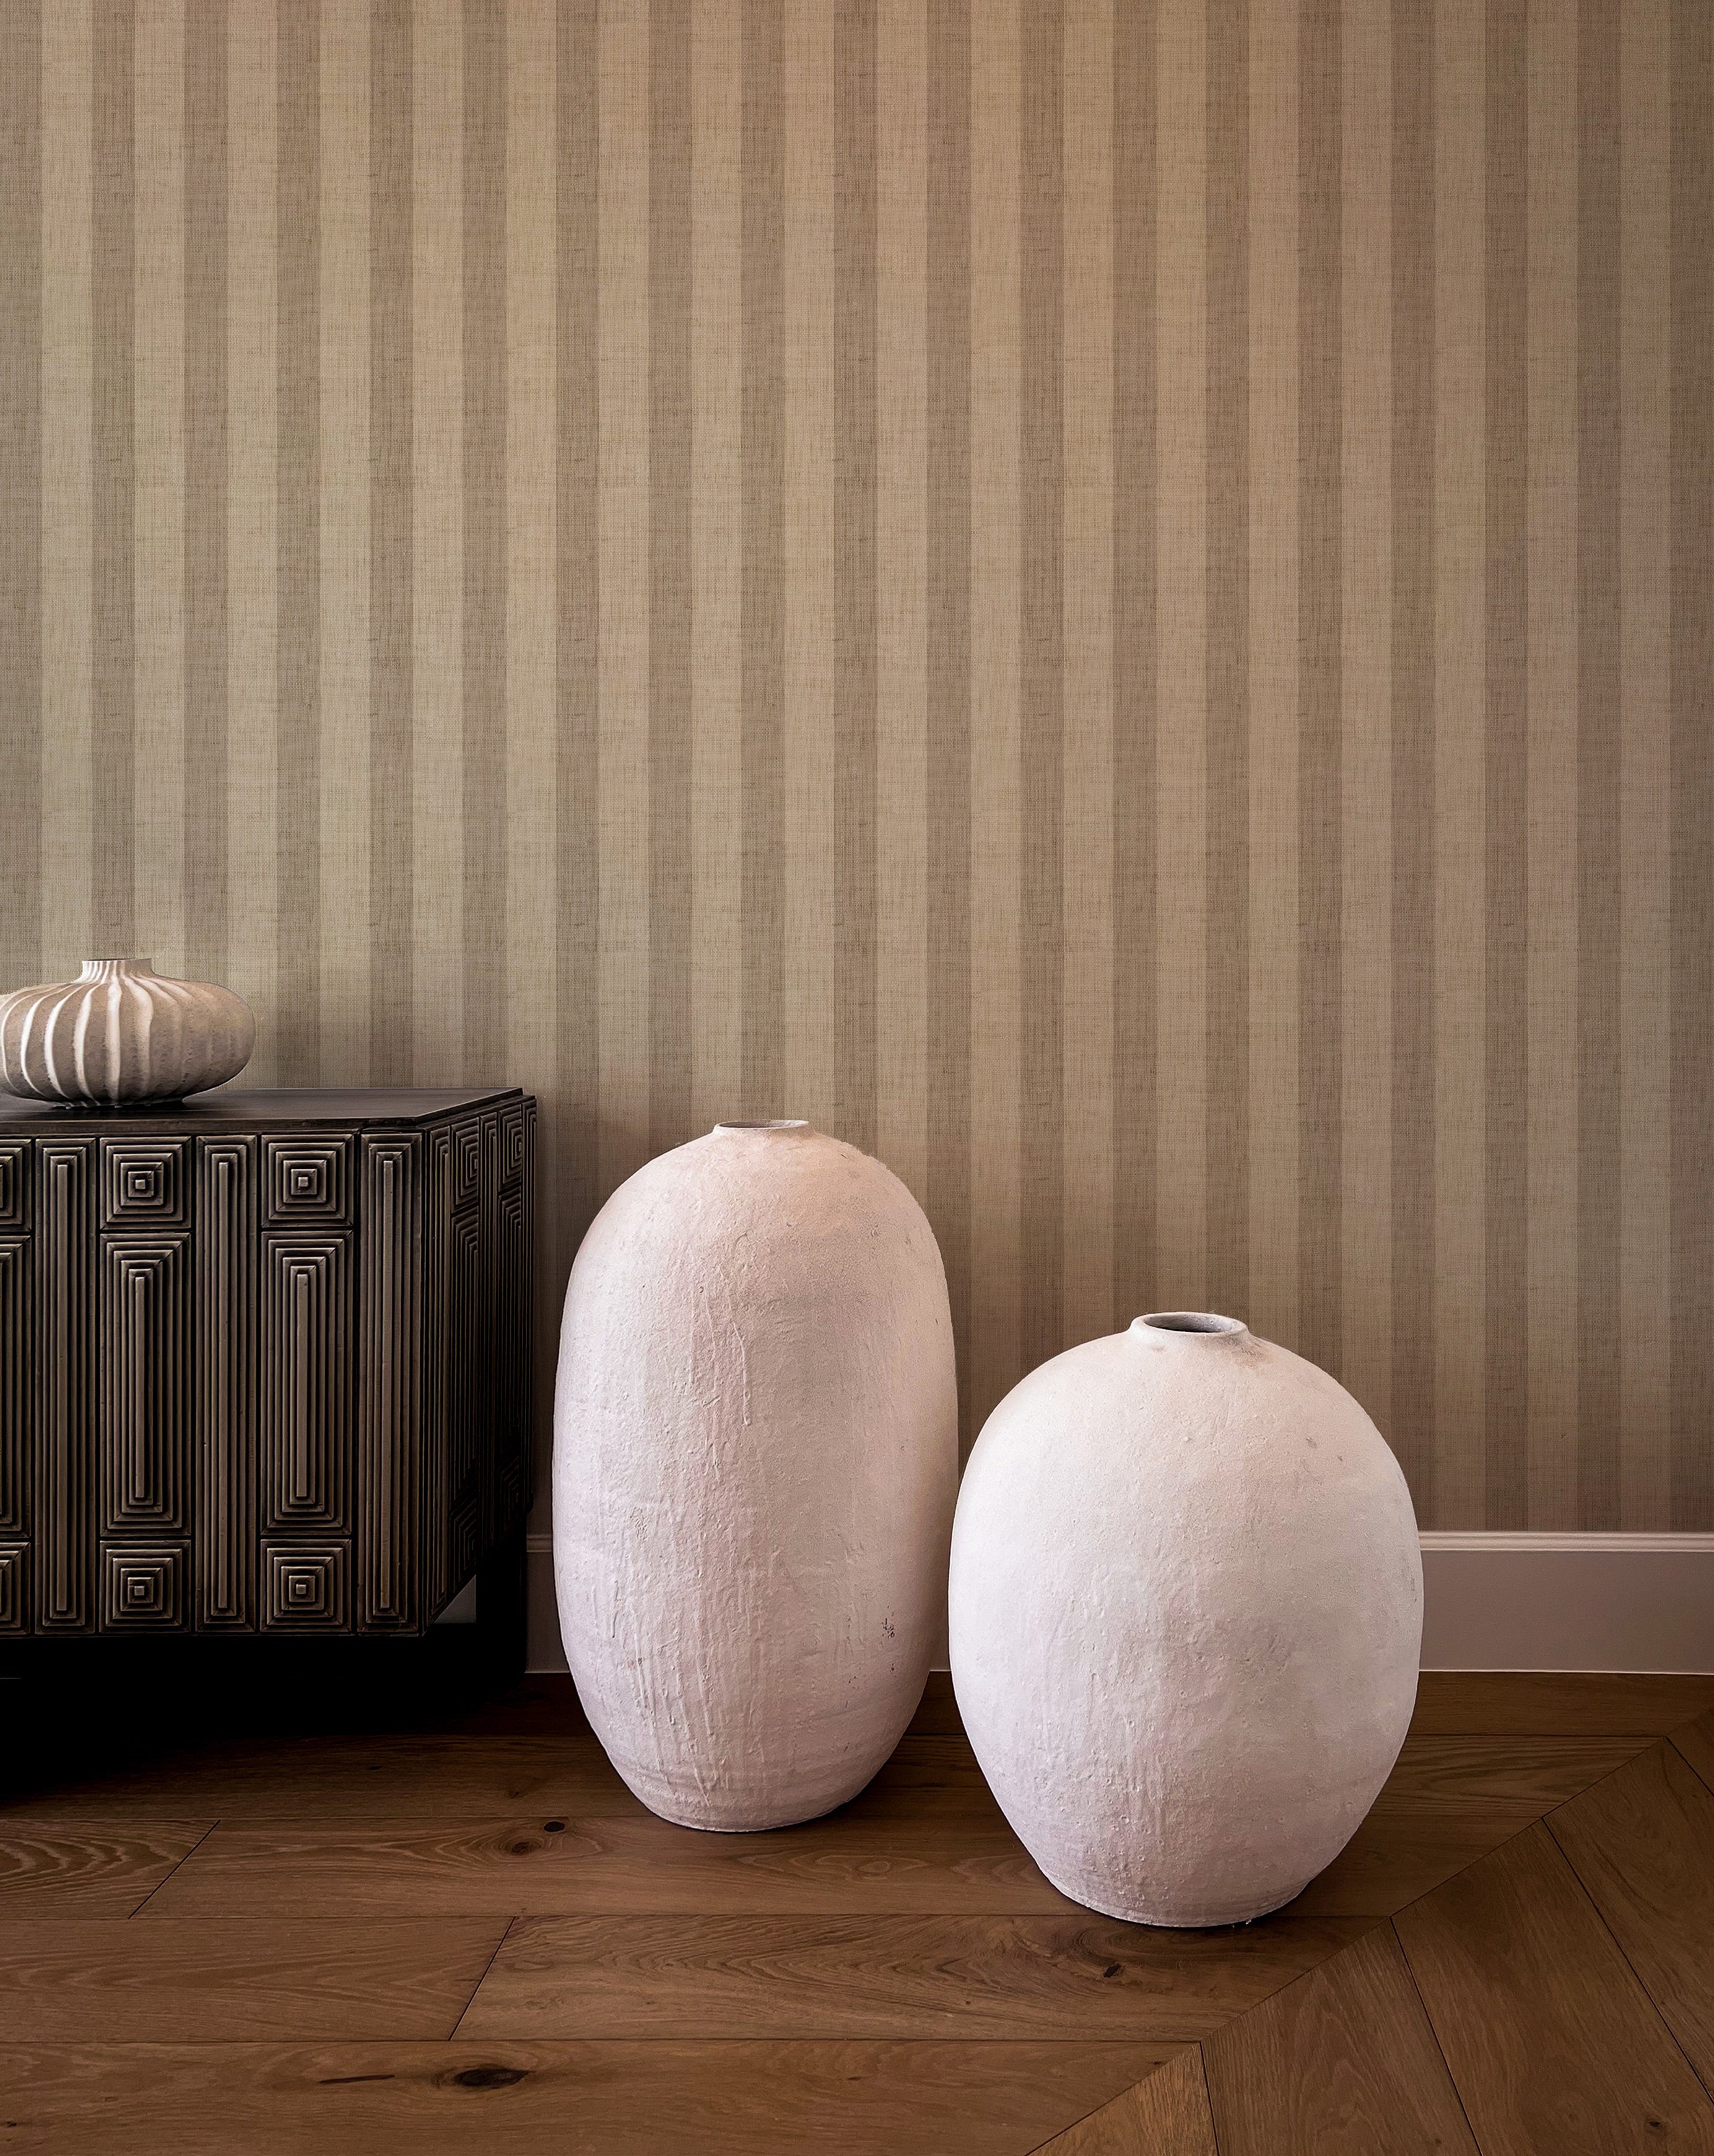 Modern interior featuring Classic Striped Wallpaper in beige tones, complemented by artistic ceramic vases on a hardwood floor. The room's aesthetic is enriched with a dark wooden cabinet and a textured silver vase, creating a sophisticated and contemporary look.